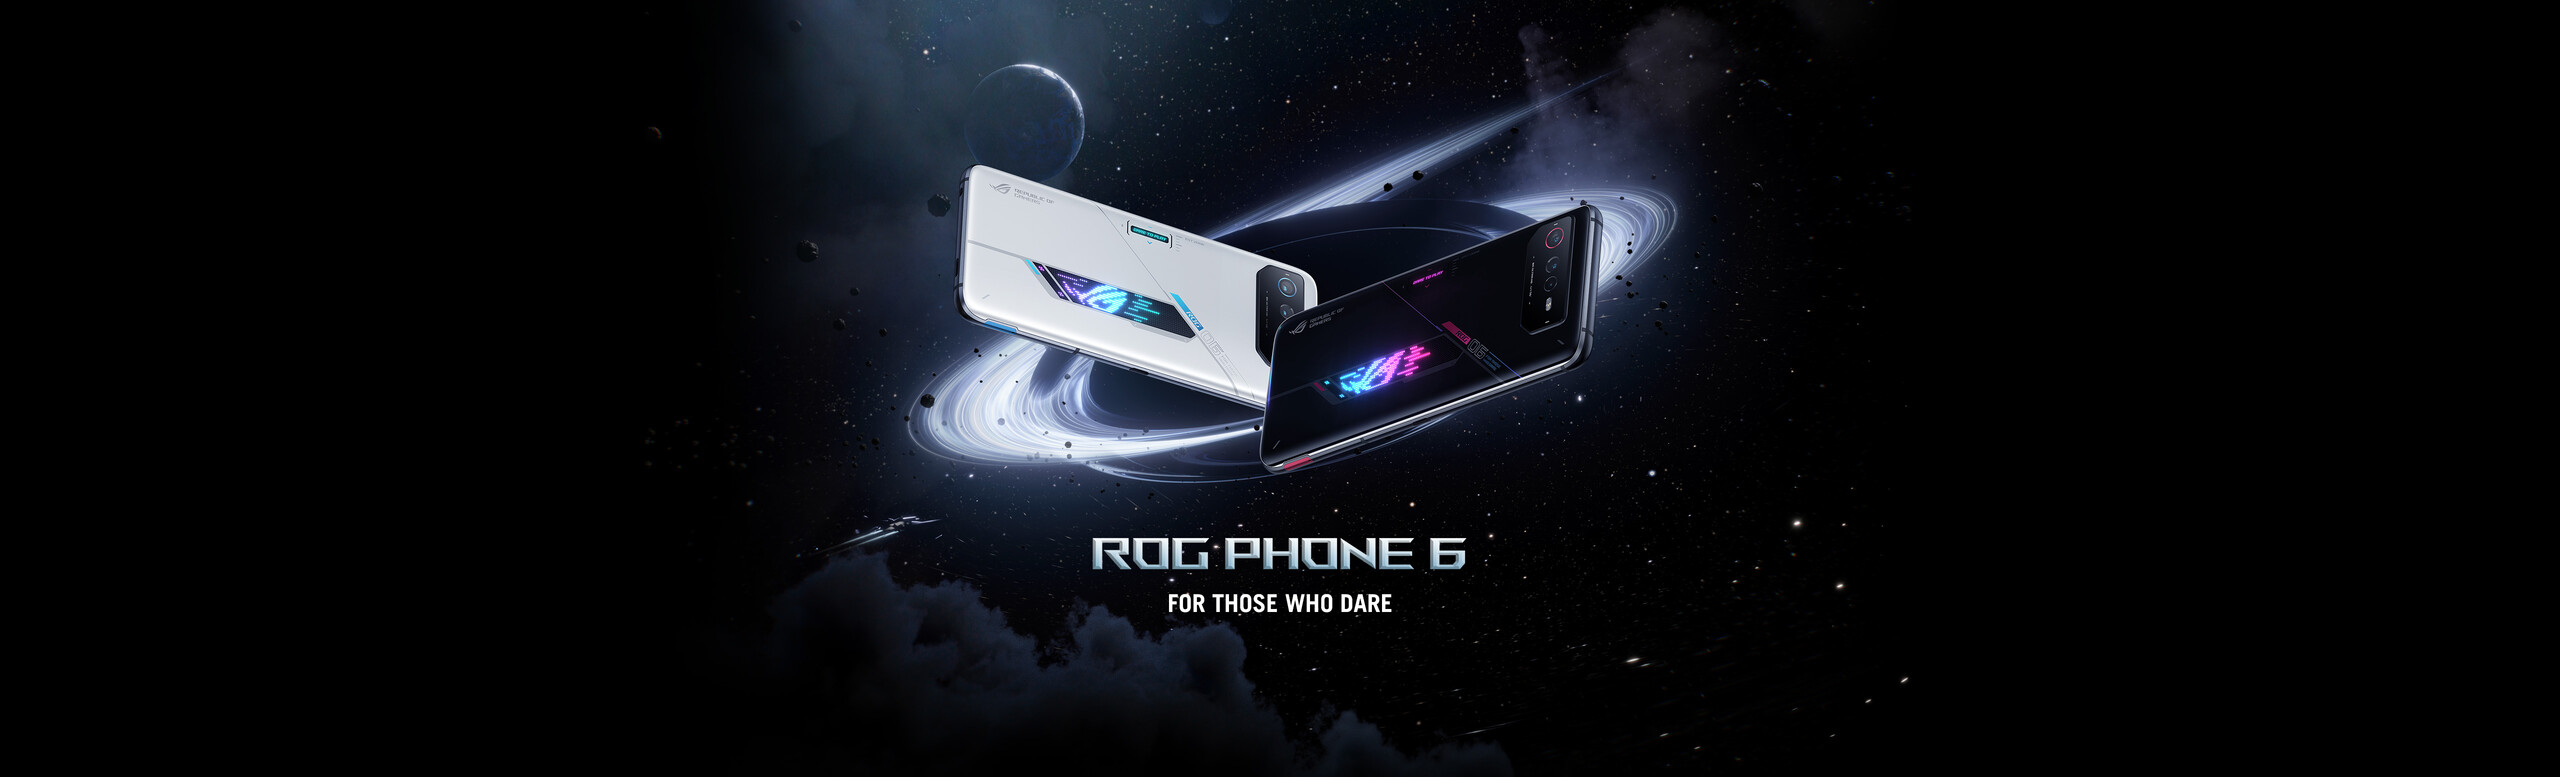 Two ROG Phone 6s models in black and white, floating on the bridge of the spaceship, with flourishing city view background.